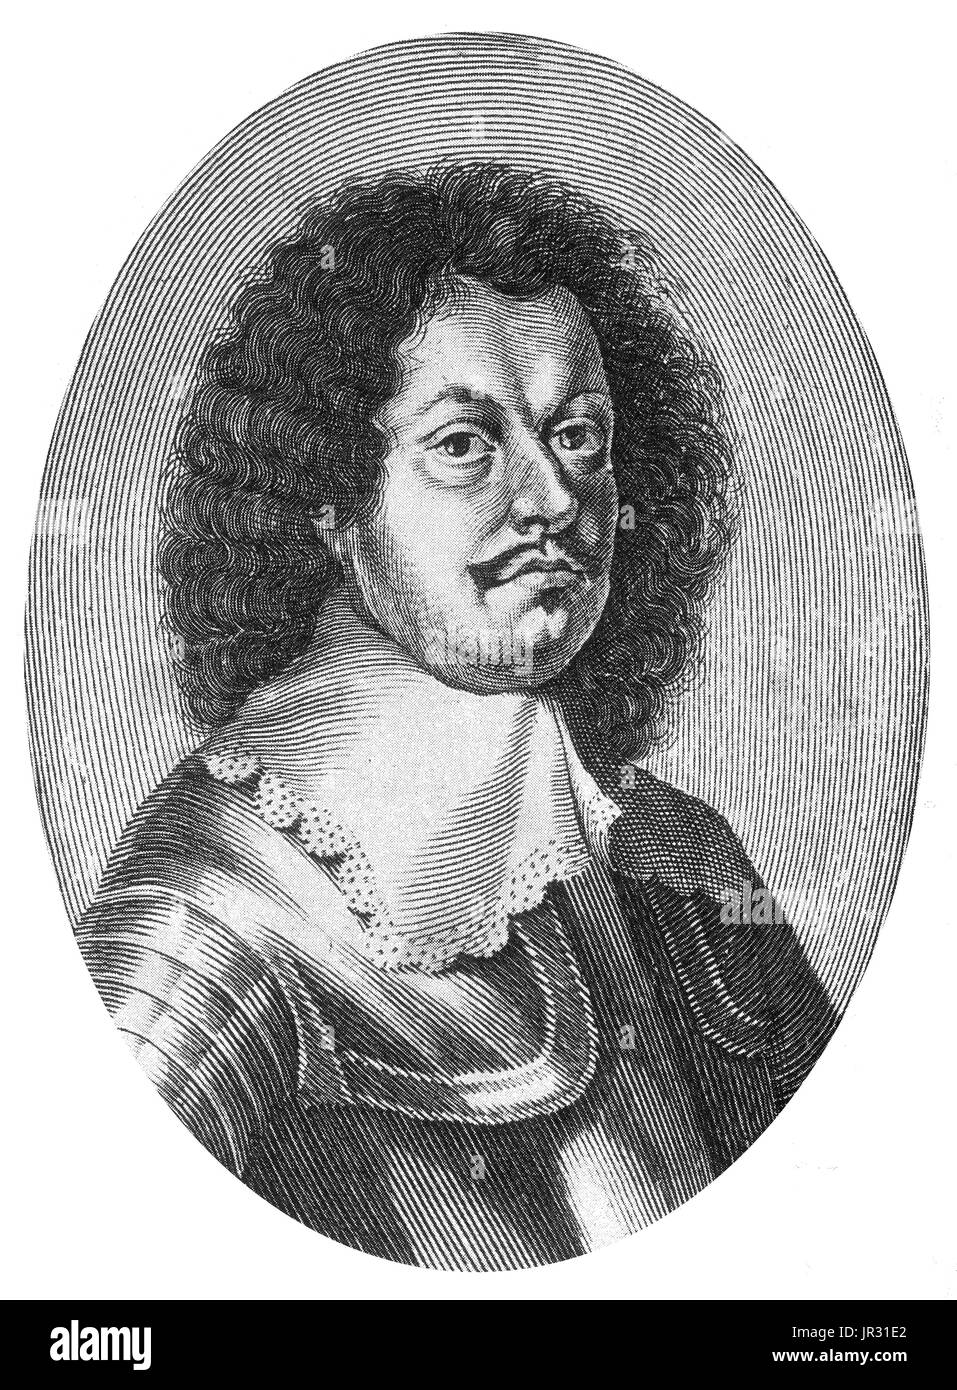 Raimondo, Count of Montecúccoli (February 21, 1609 - October 16, 1680) was an Italian military commander who also served as general for the Habsburg Monarchy. As a general, Montecuccoli shared with Turenne and Condé the first place among European soldiers of his time. For his success in halting the Turkish advance he had been hailed the savior of Europe. He was also influential as a military theorist, with perhaps his most famous quote being 'For war you need three things: 1. Money. 2. Money. 3. Money.' His Memorie della guerra profoundly influenced the age which followed his own. He excelled  Stock Photo